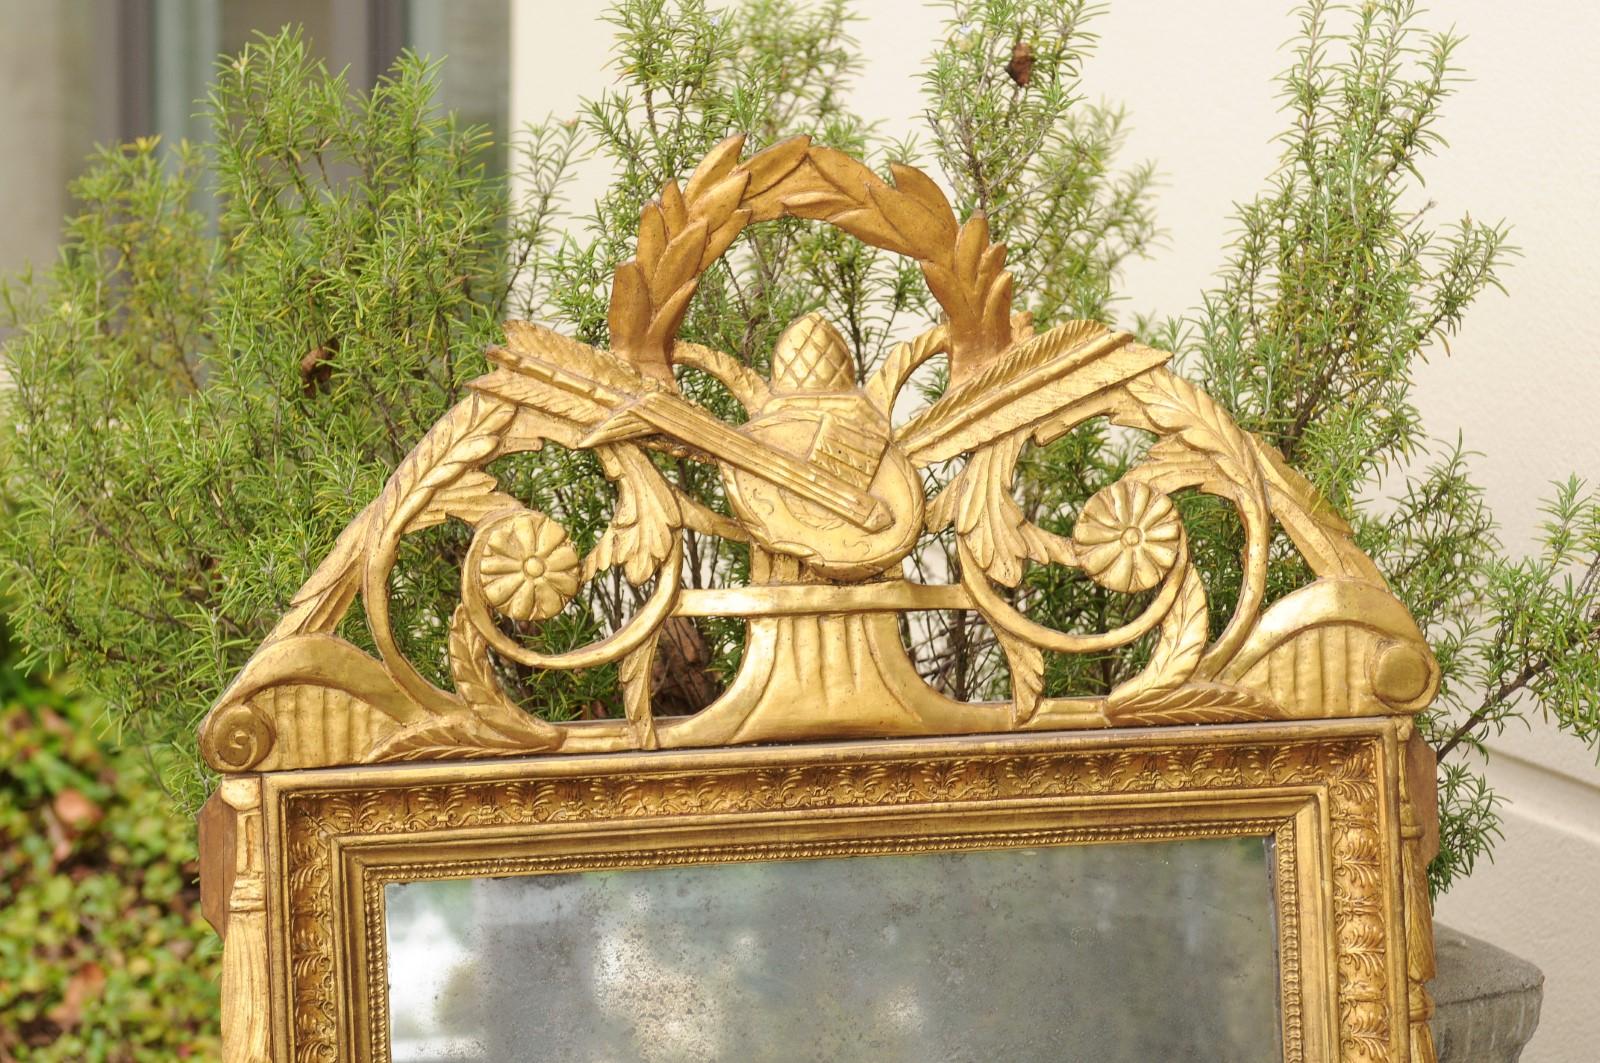 Carved French Louis XVI Late 18th Century Giltwood Mirror with Liberal Arts Motifs For Sale